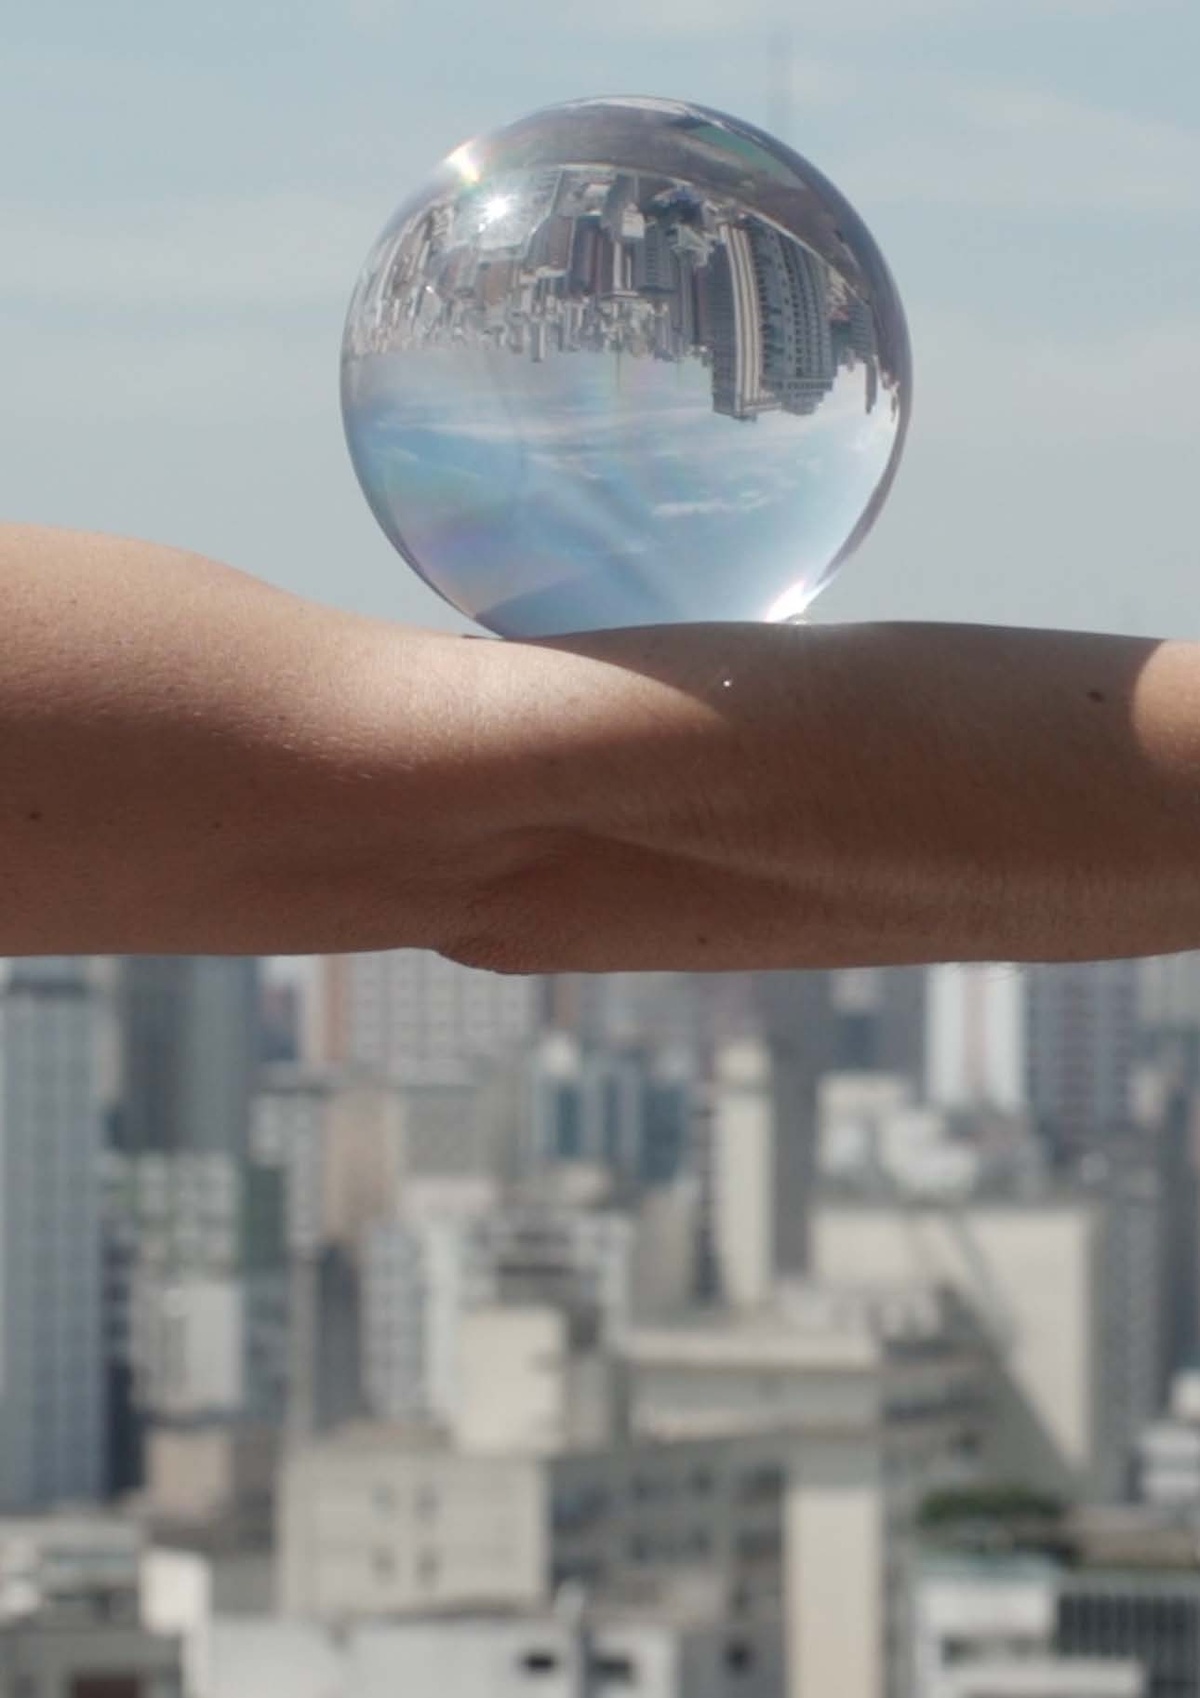 Process image from the ‘How to Remain Silent’ exhibition on A4’s ground floor that consists of a still frame from Lia Chaia’s video performance ‘Aleph’. At the front, a closeup view of an arm with a glass orb balancing on it. At the back, an out of focus view of São Paulo cityscape.
